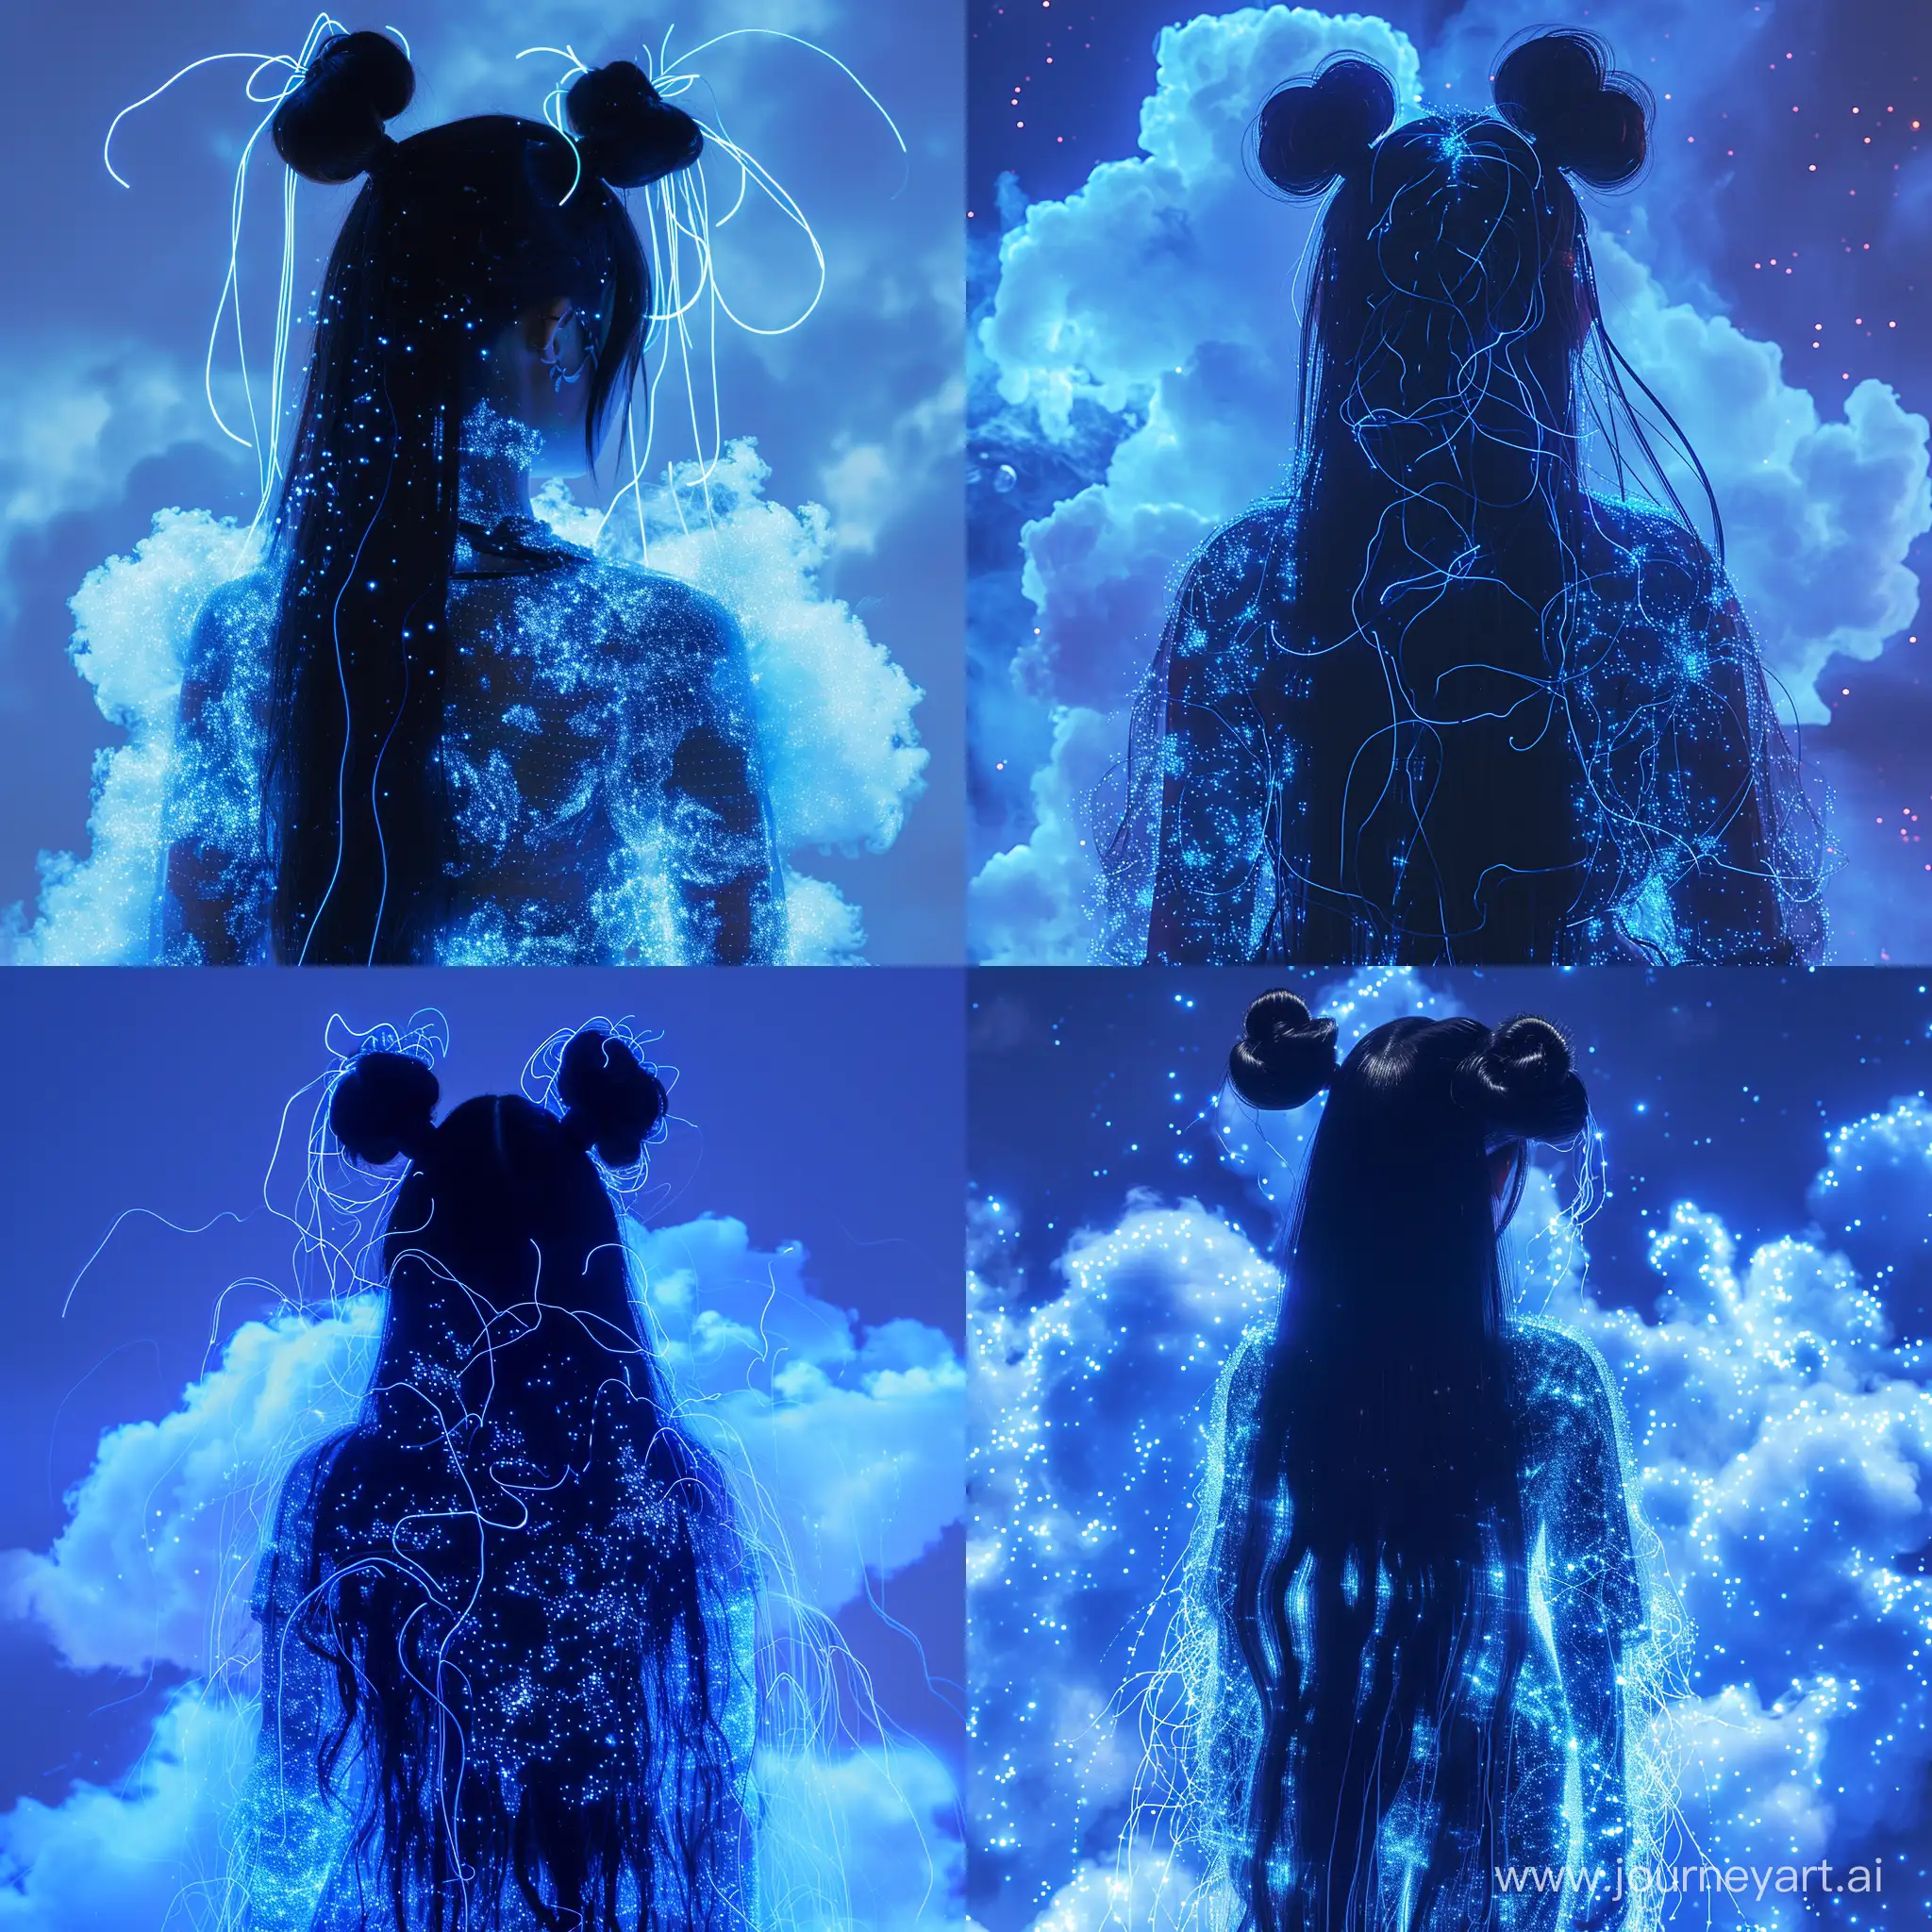 ((Ultra Long Exposure Photography)) cyberpunk woman with long black hair in space buns. She is the goddess of horticulture. She’s covered in millions of microscopic ultra bright Blue neon strings emanating from her body. beautiful backlit silhouette, high detailed, covered in neon clouds. Blue color palette.